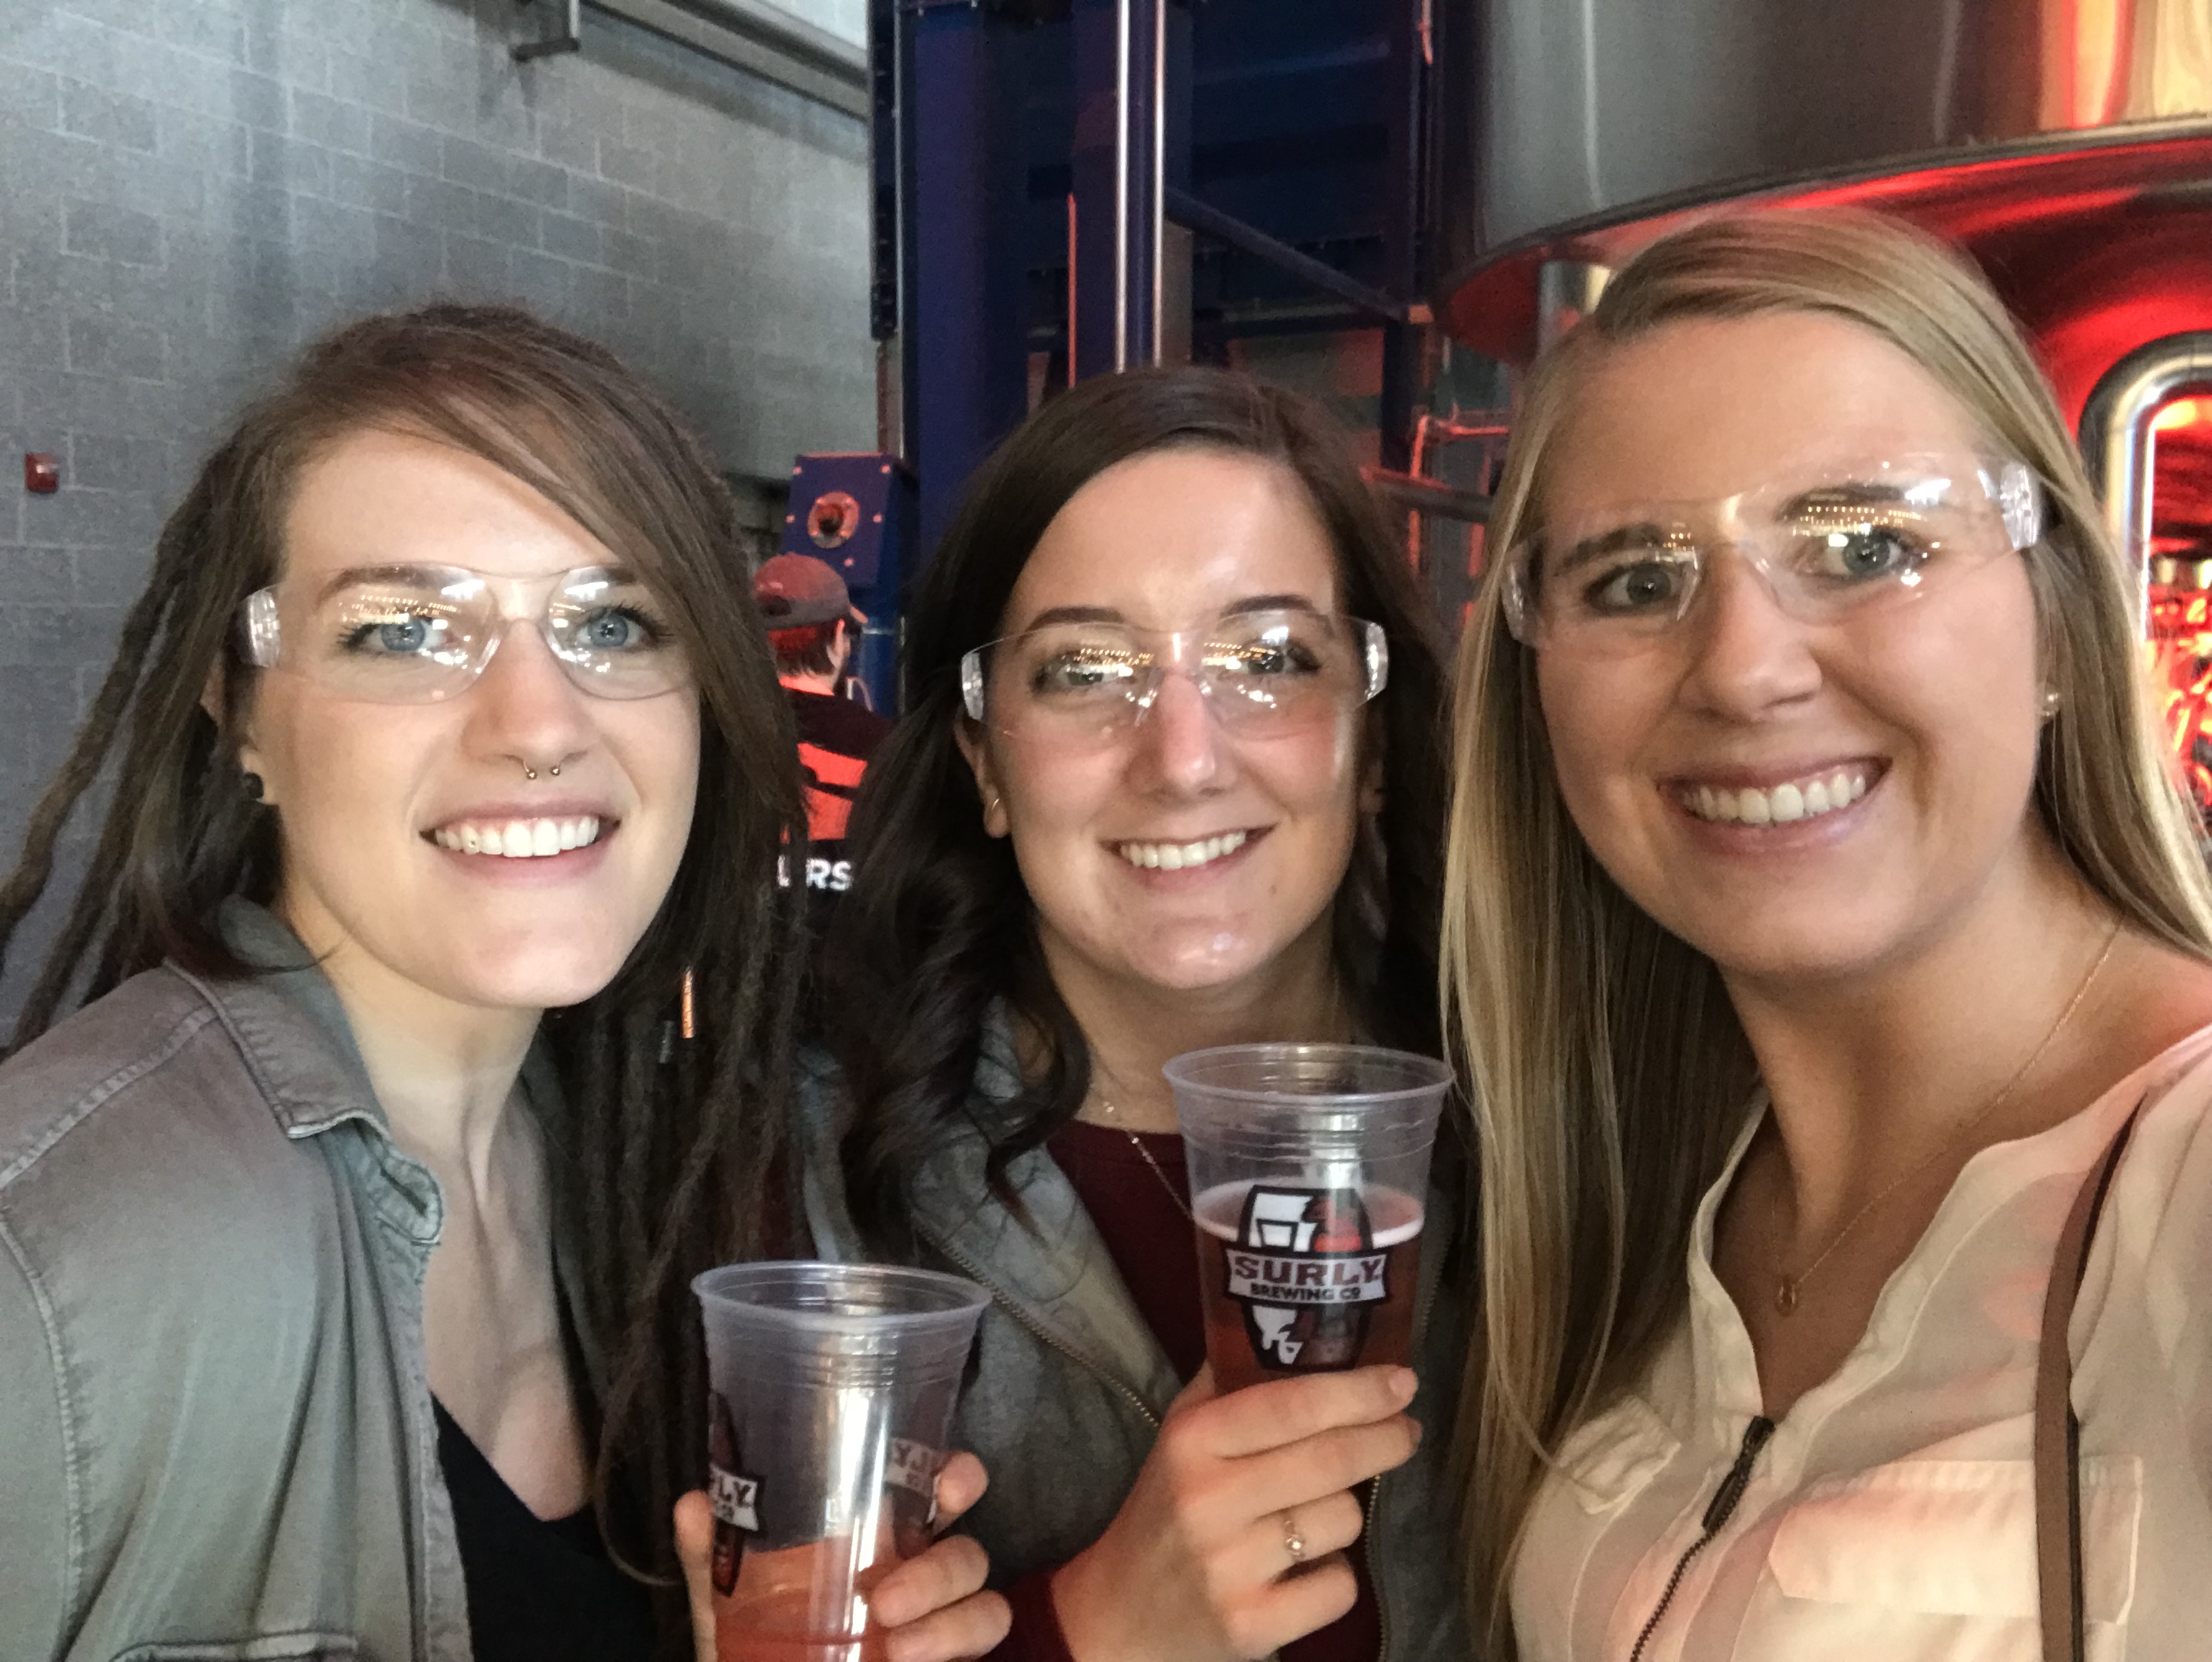 Jaden, Catherine, and Jacquelyn from 9 Clouds show off their cool eyewear on the Surly brewery tour.